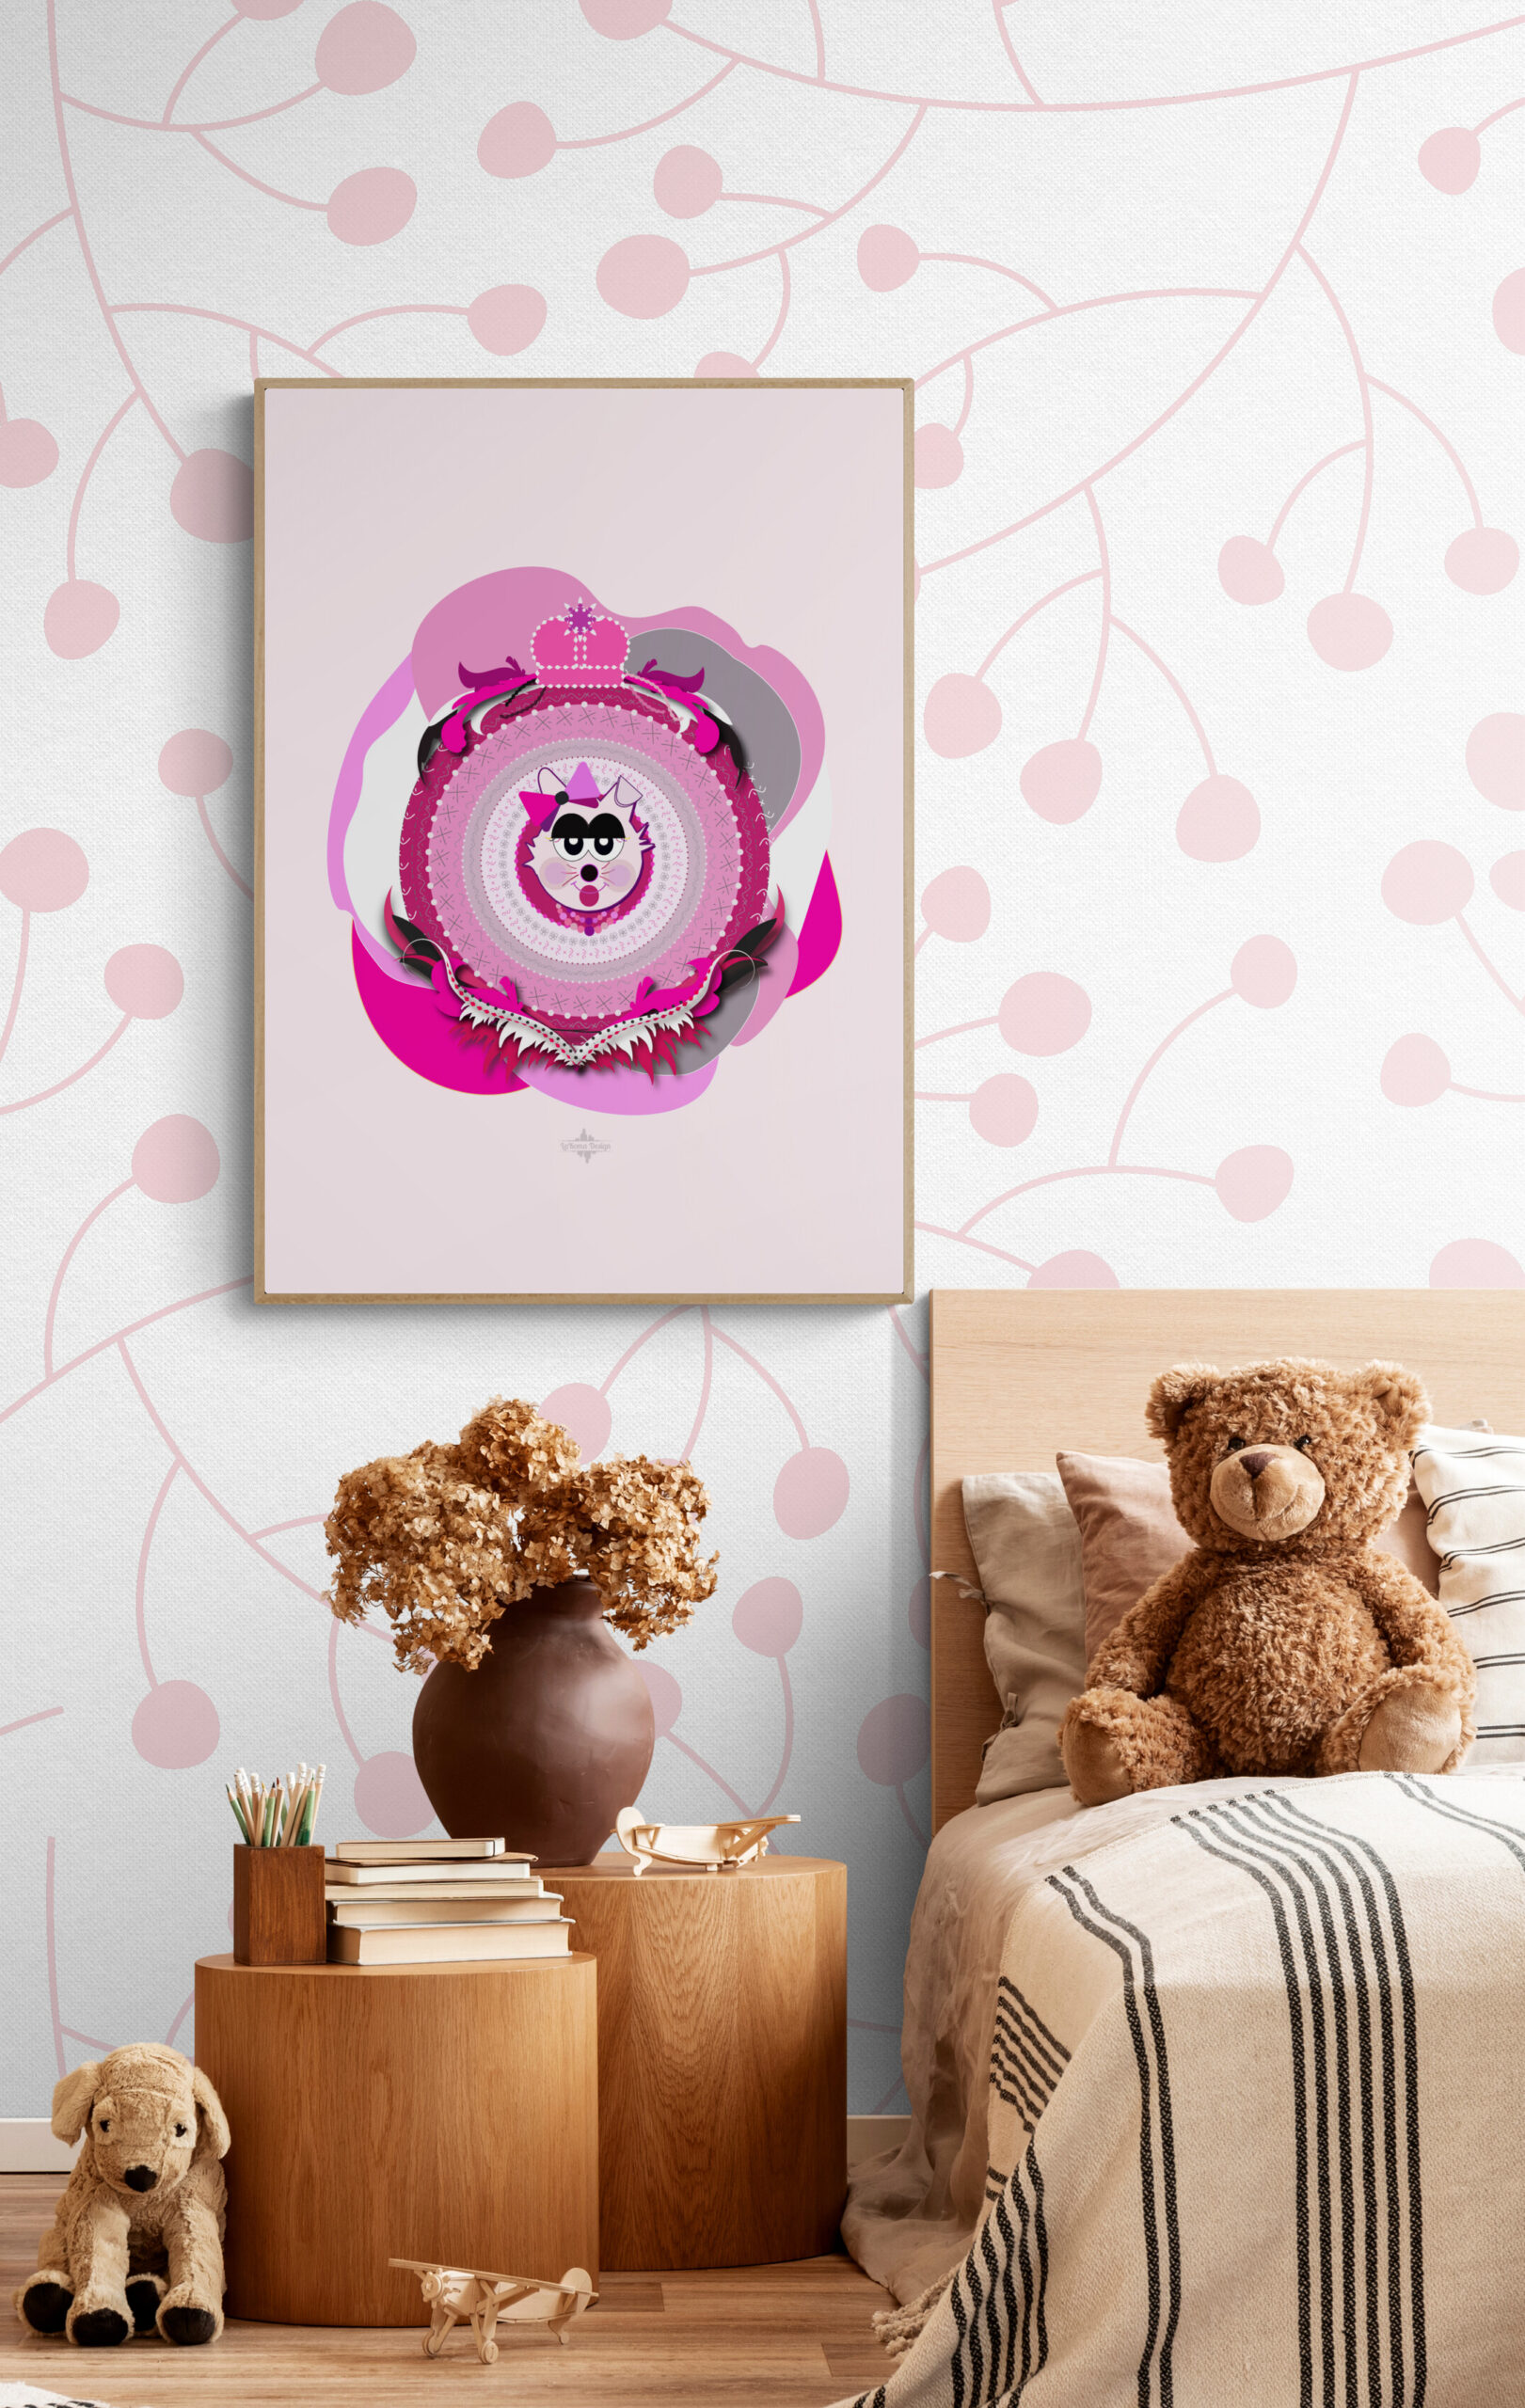 Magenta Supersister Cat poster hangs in a vintage girl's room. The playful cartoon cat, with a pink and purple color scheme and a decorative bobbin on her head, contrasts with the delicate floral wallpaper. A brown teddy bear sits on a brown side table next to the poster